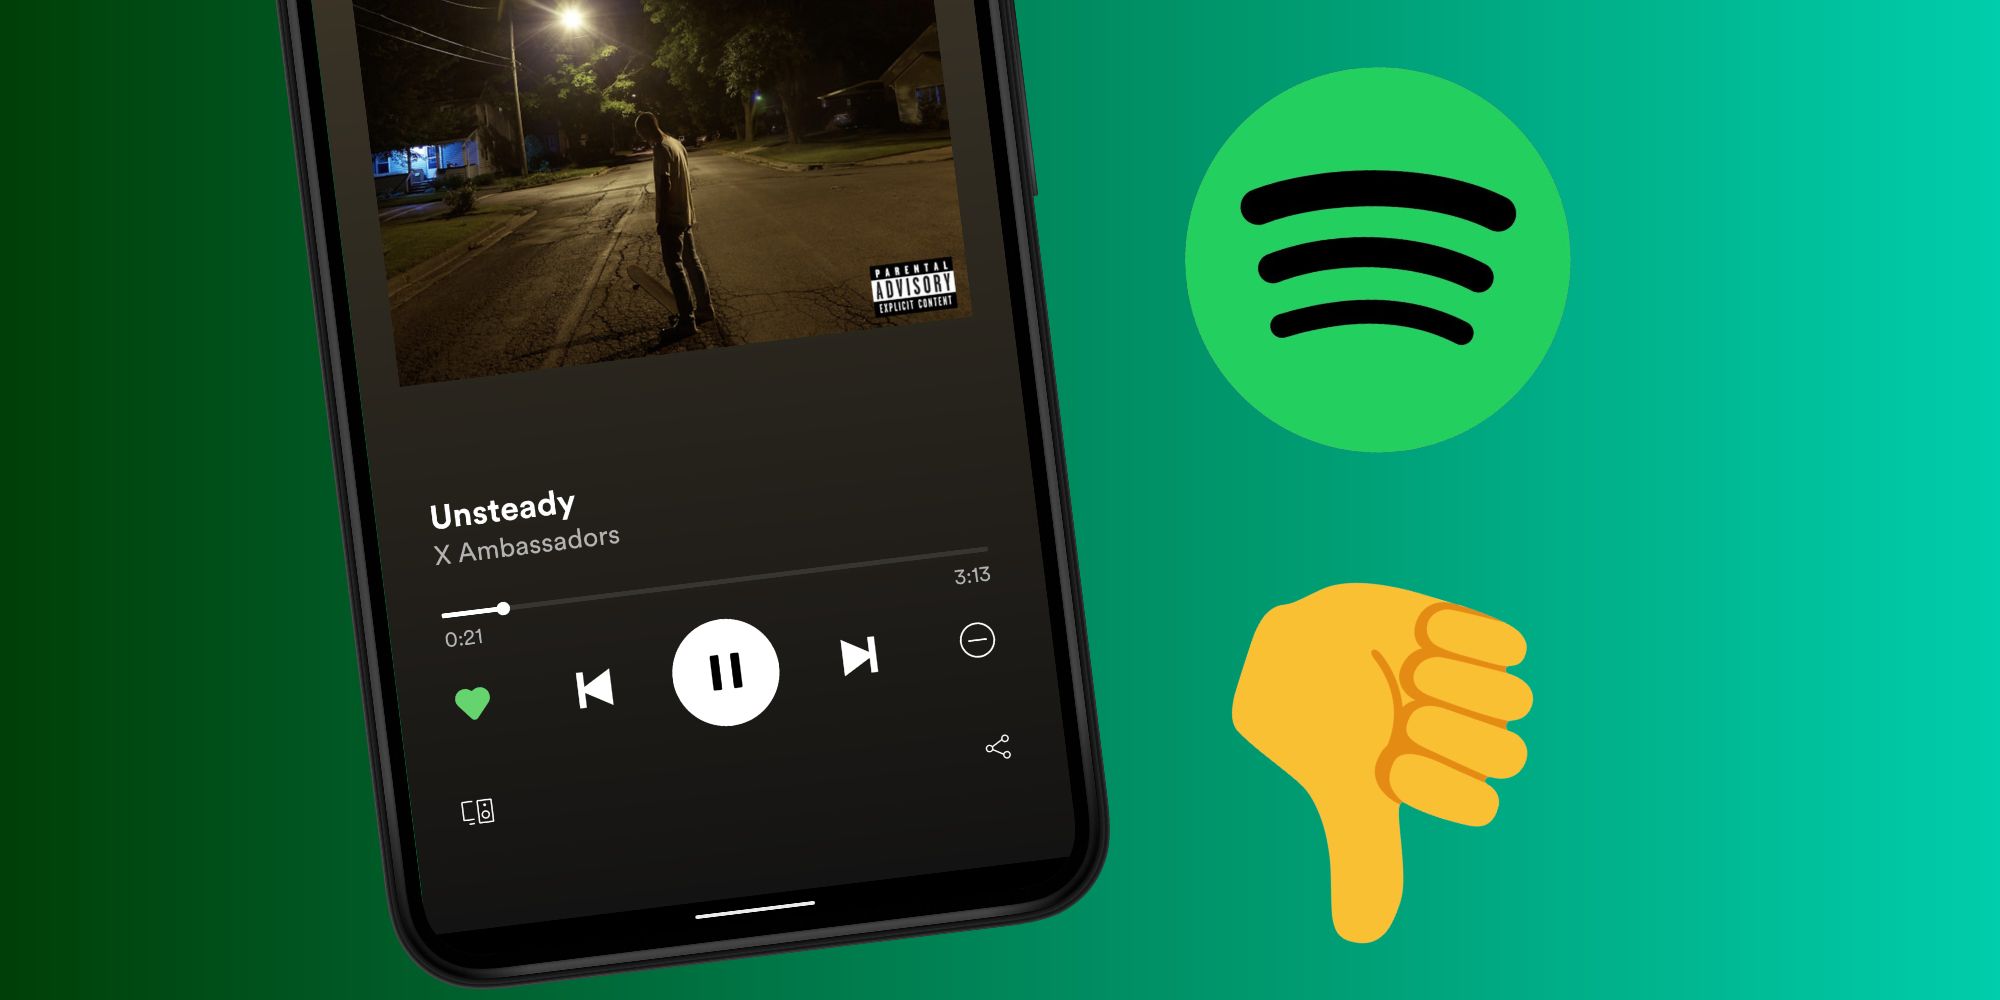 How to hide (or unhide) songs you don't want to hear on Spotify